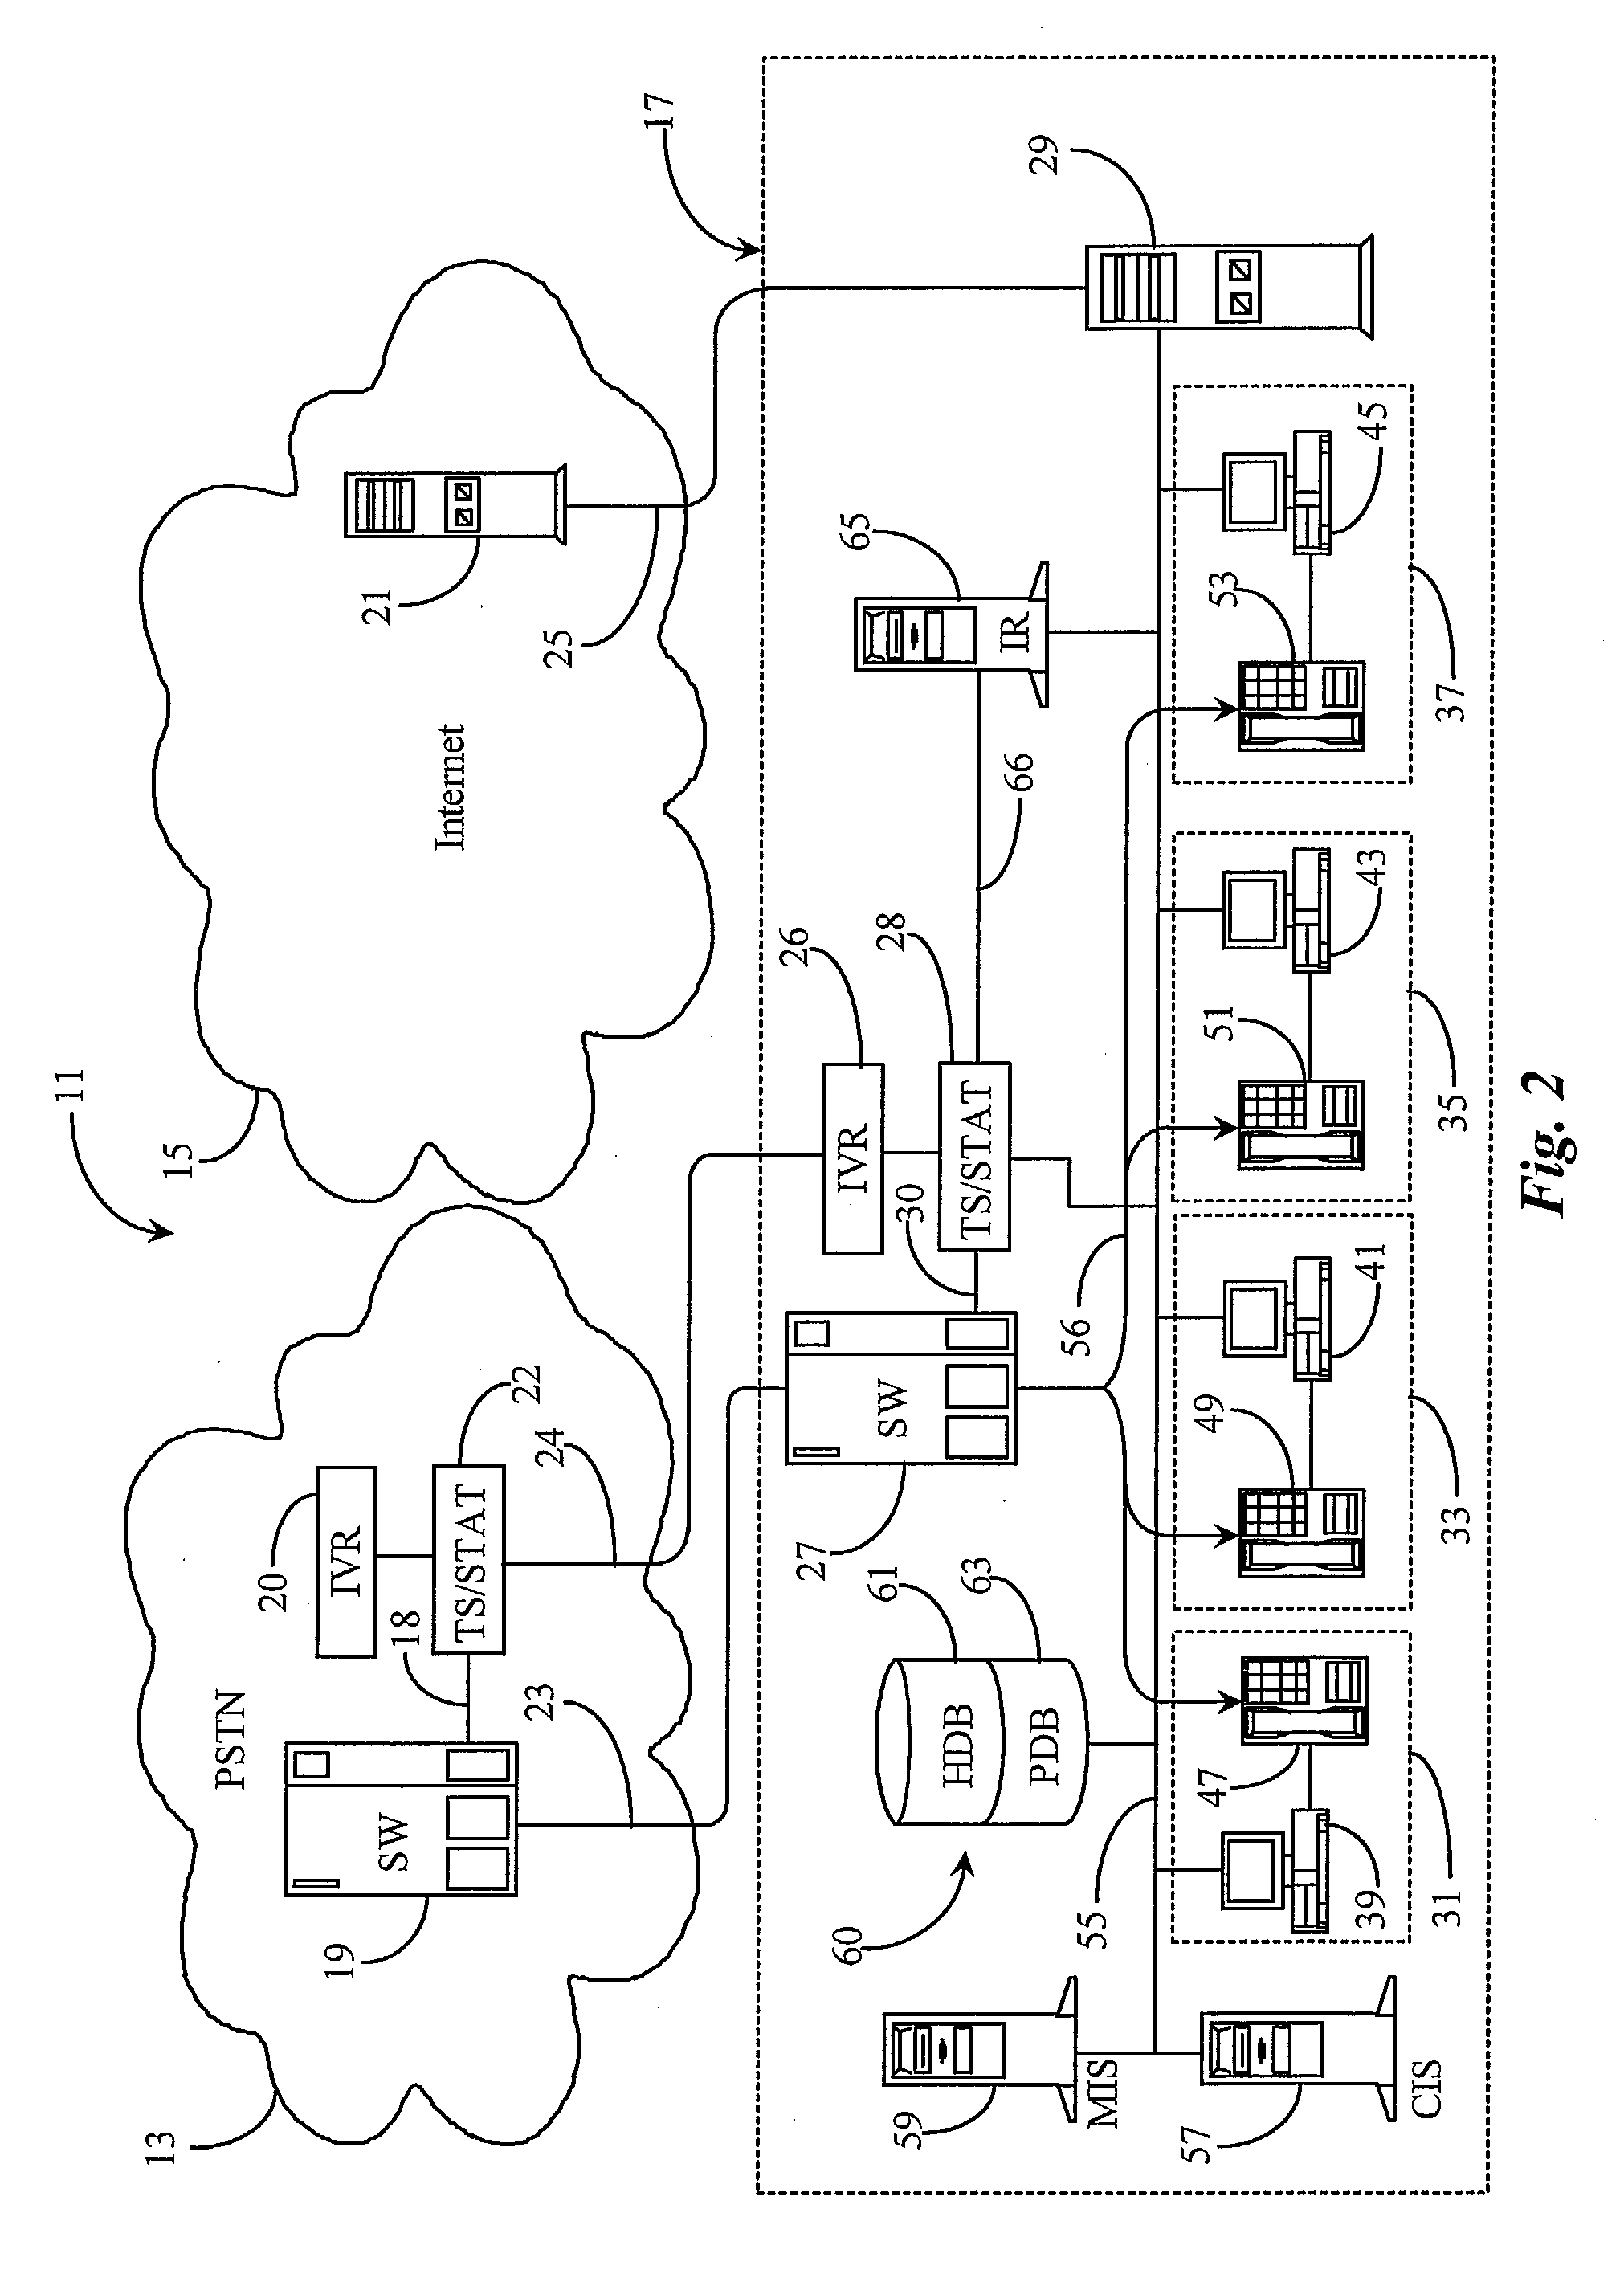 Method for Predictive Routing of Incoming Transactions Within a Communication Center According to Potential Profit Analysis